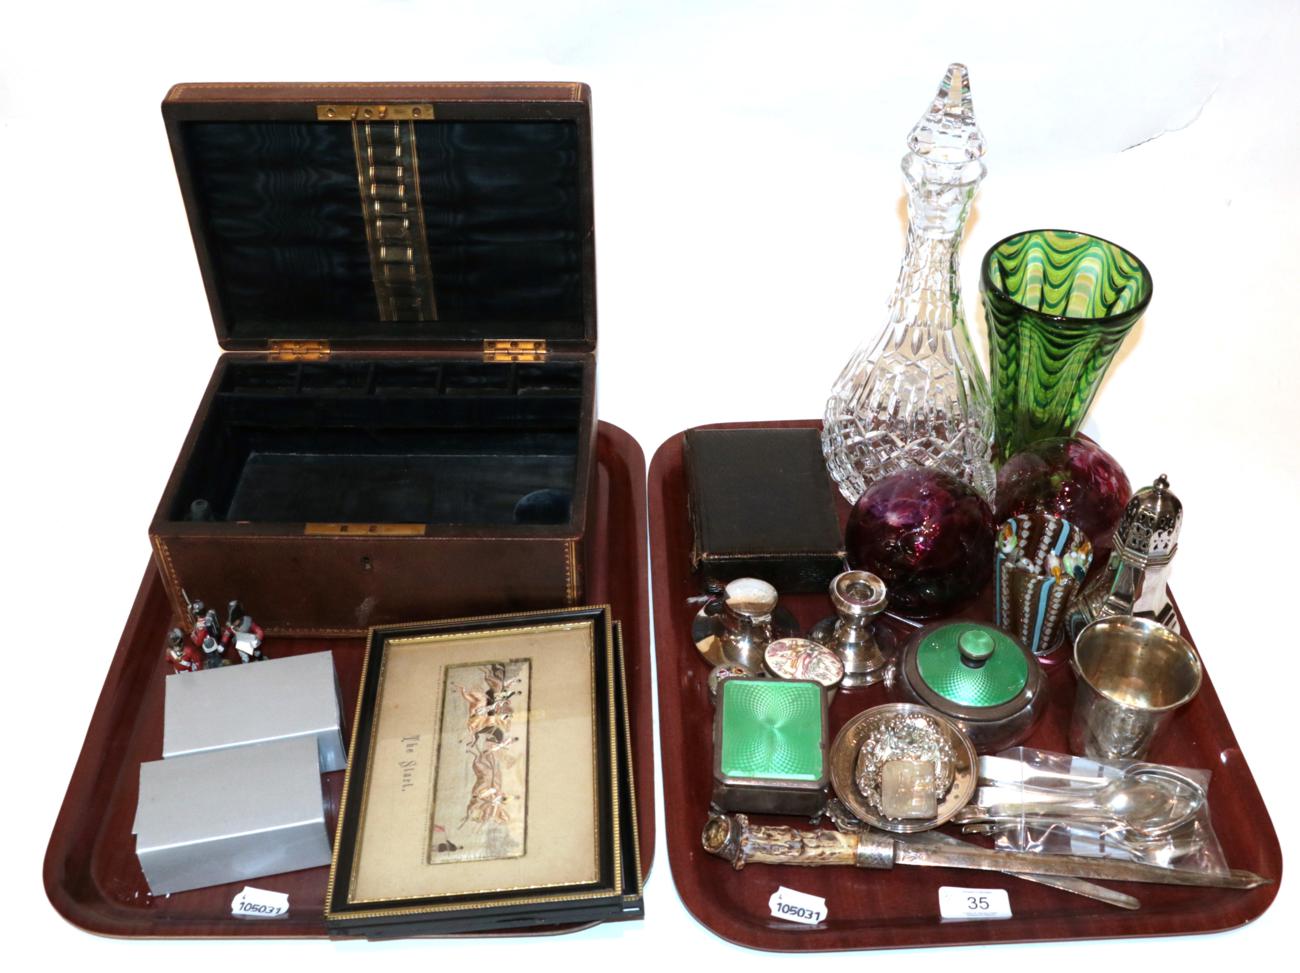 Lot 35 - A group lot of silver, silver plate and other items including: a group of spoons; silver and enamel